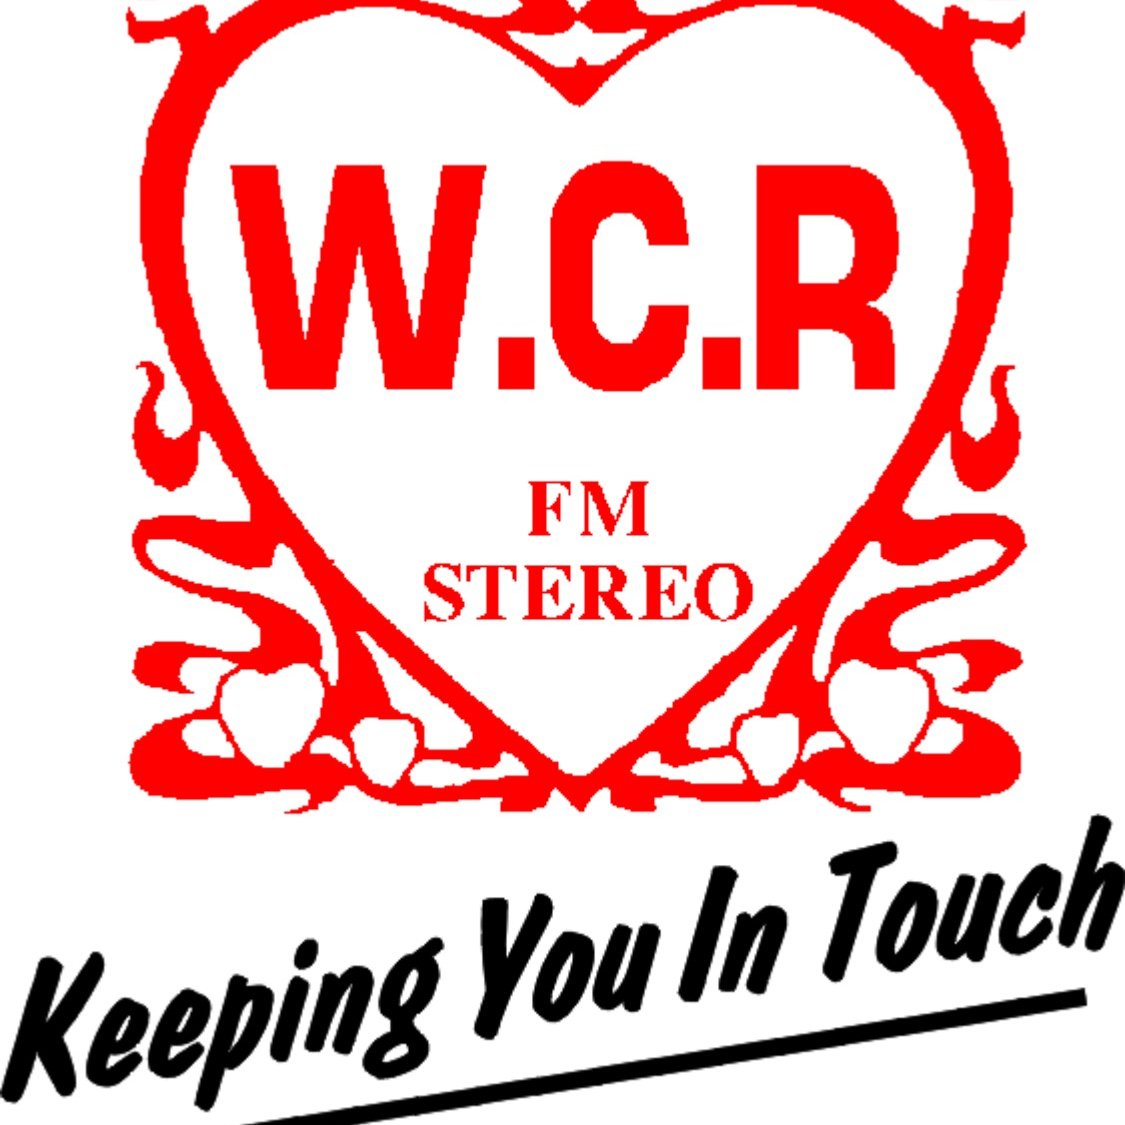 WCR broadcasts on 105.5fm to Warminster and the surrounding area.  Keeping You in Touch.  Giving Warminster a Voice.  Also find us on https://t.co/pGXP4d0ZaM.